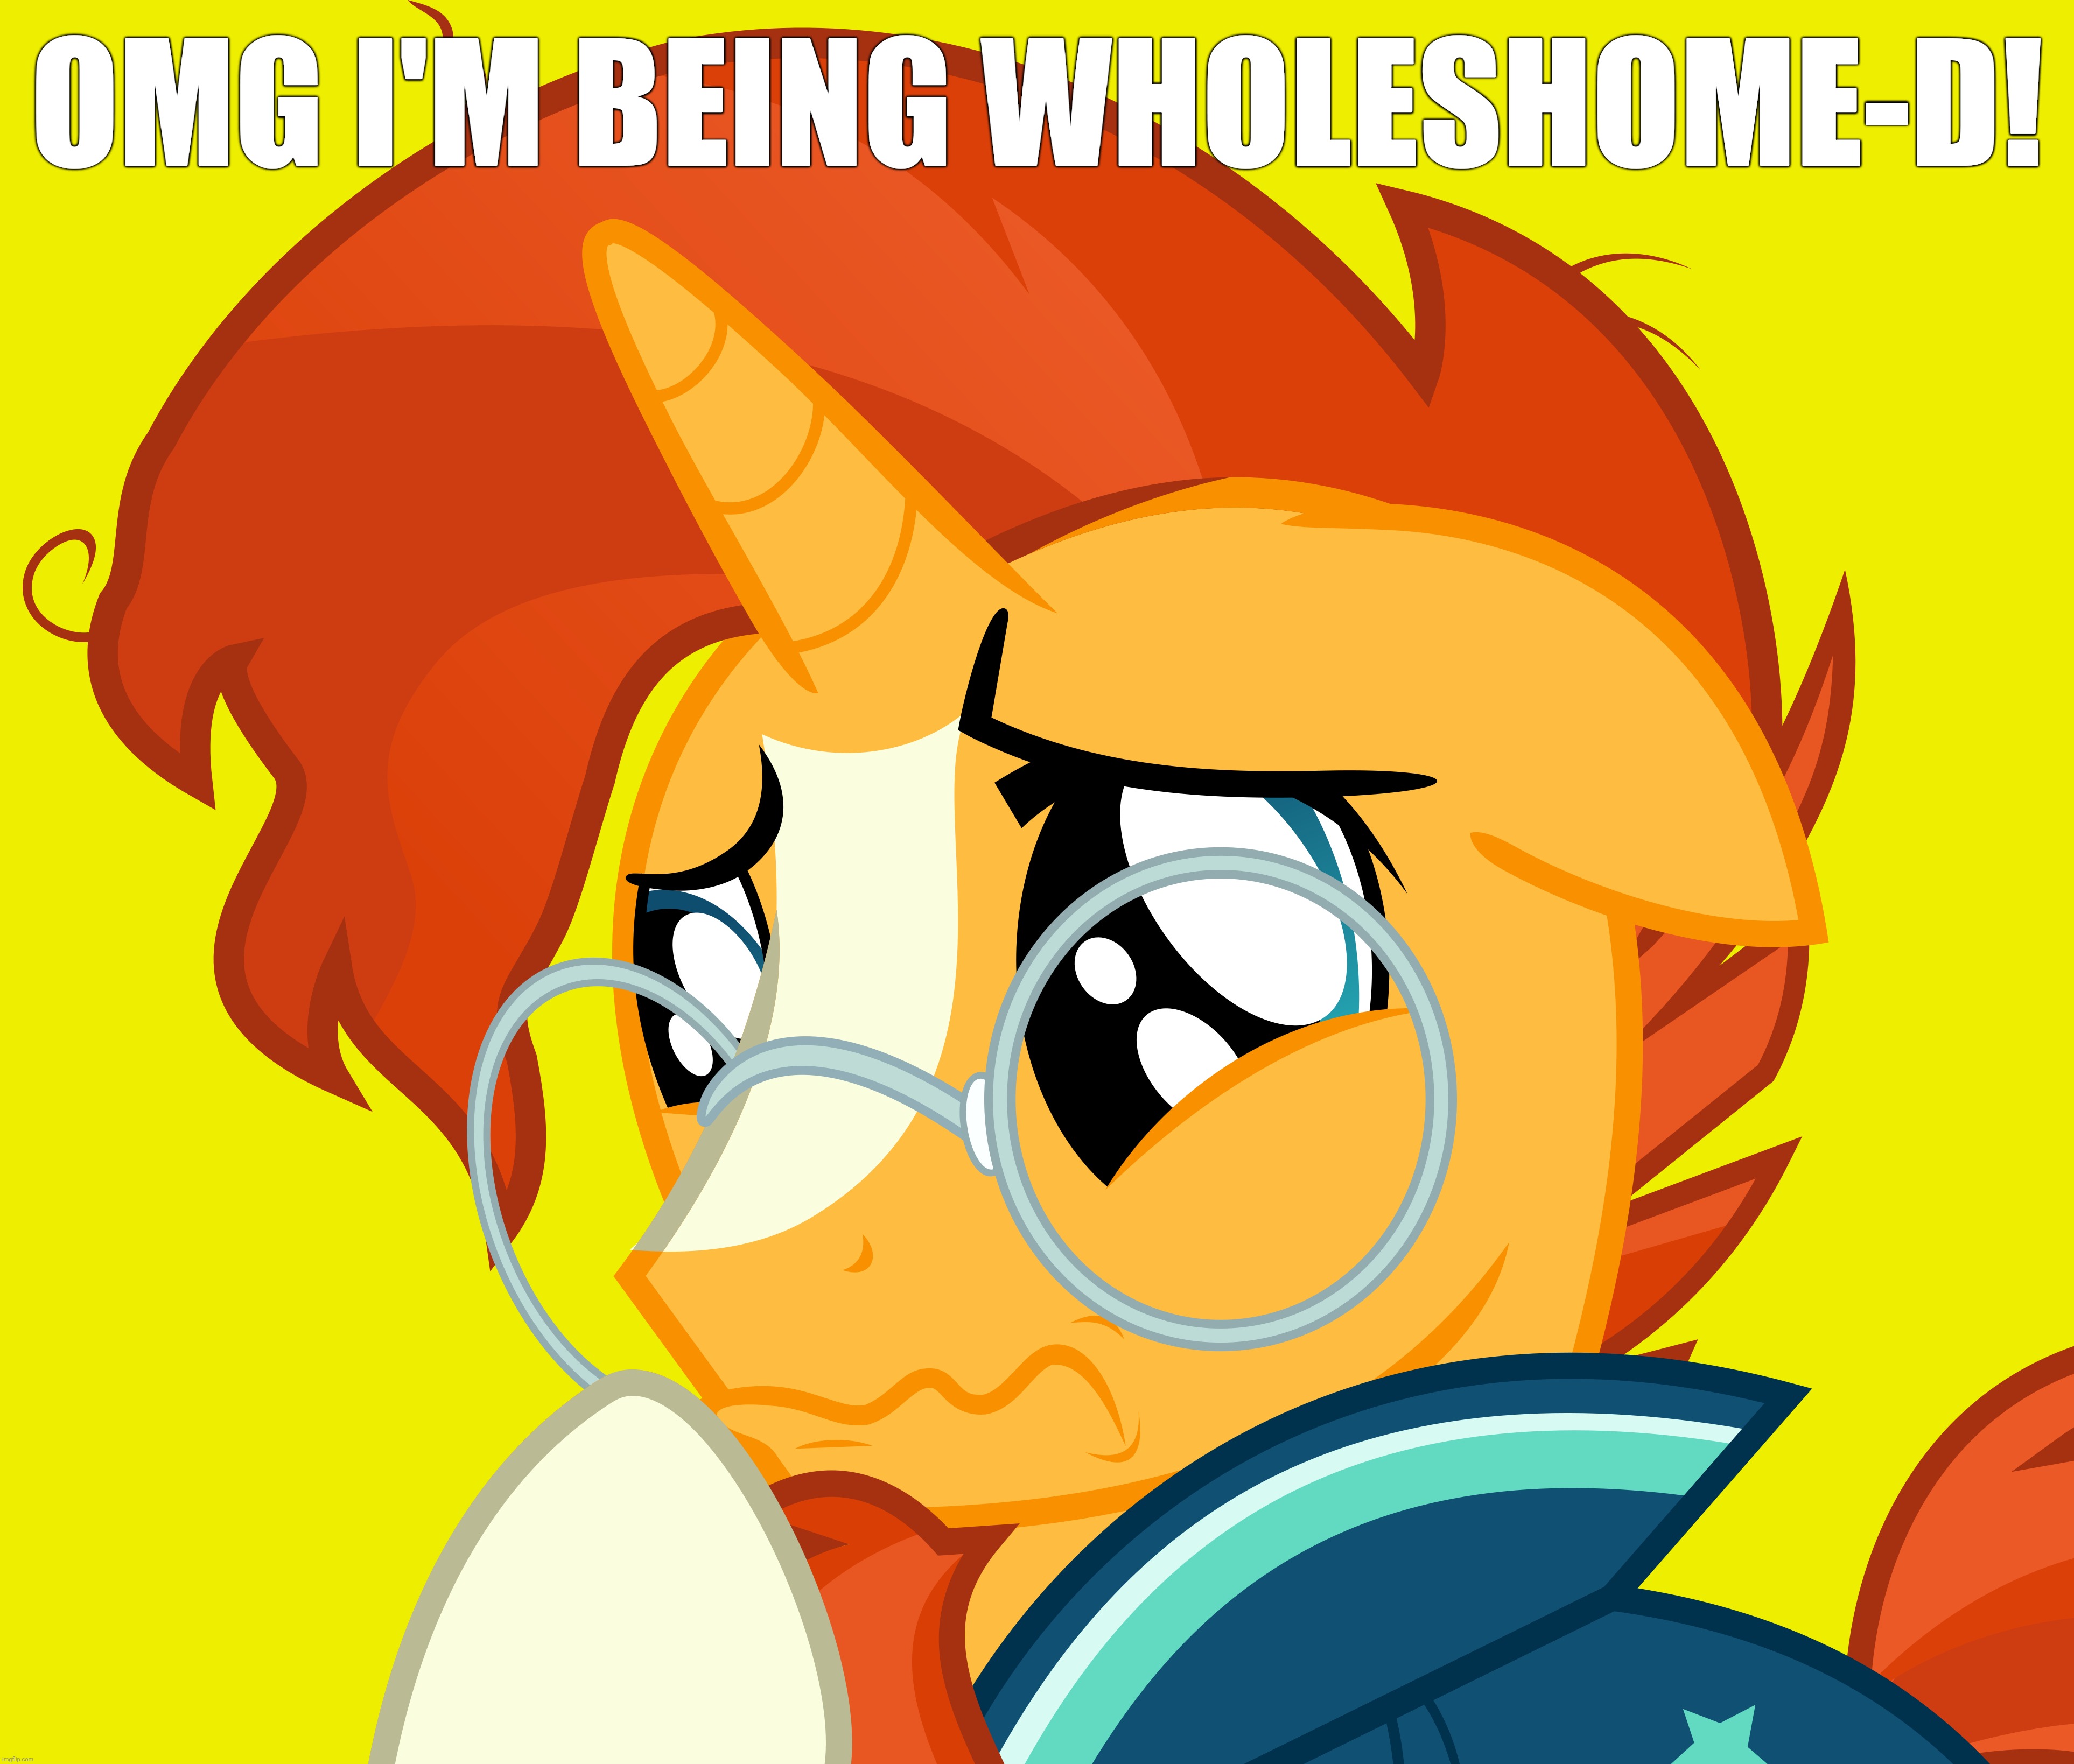 OMG I'M BEING WHOLESHOME-D! | made w/ Imgflip meme maker